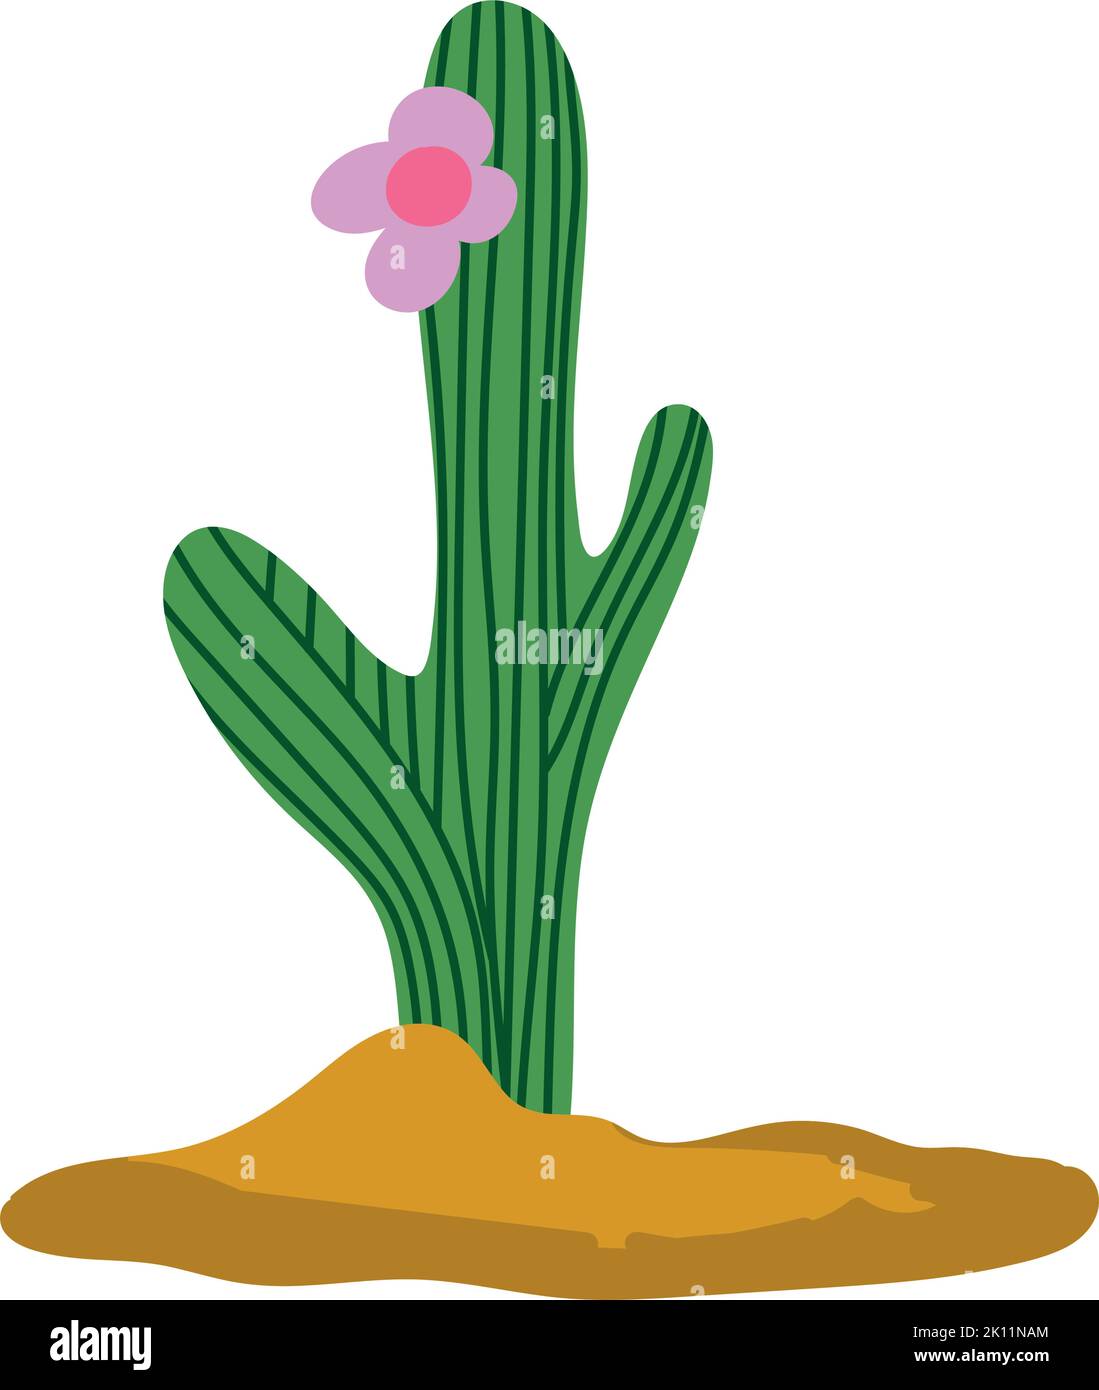 cactus plant and flower Stock Vector